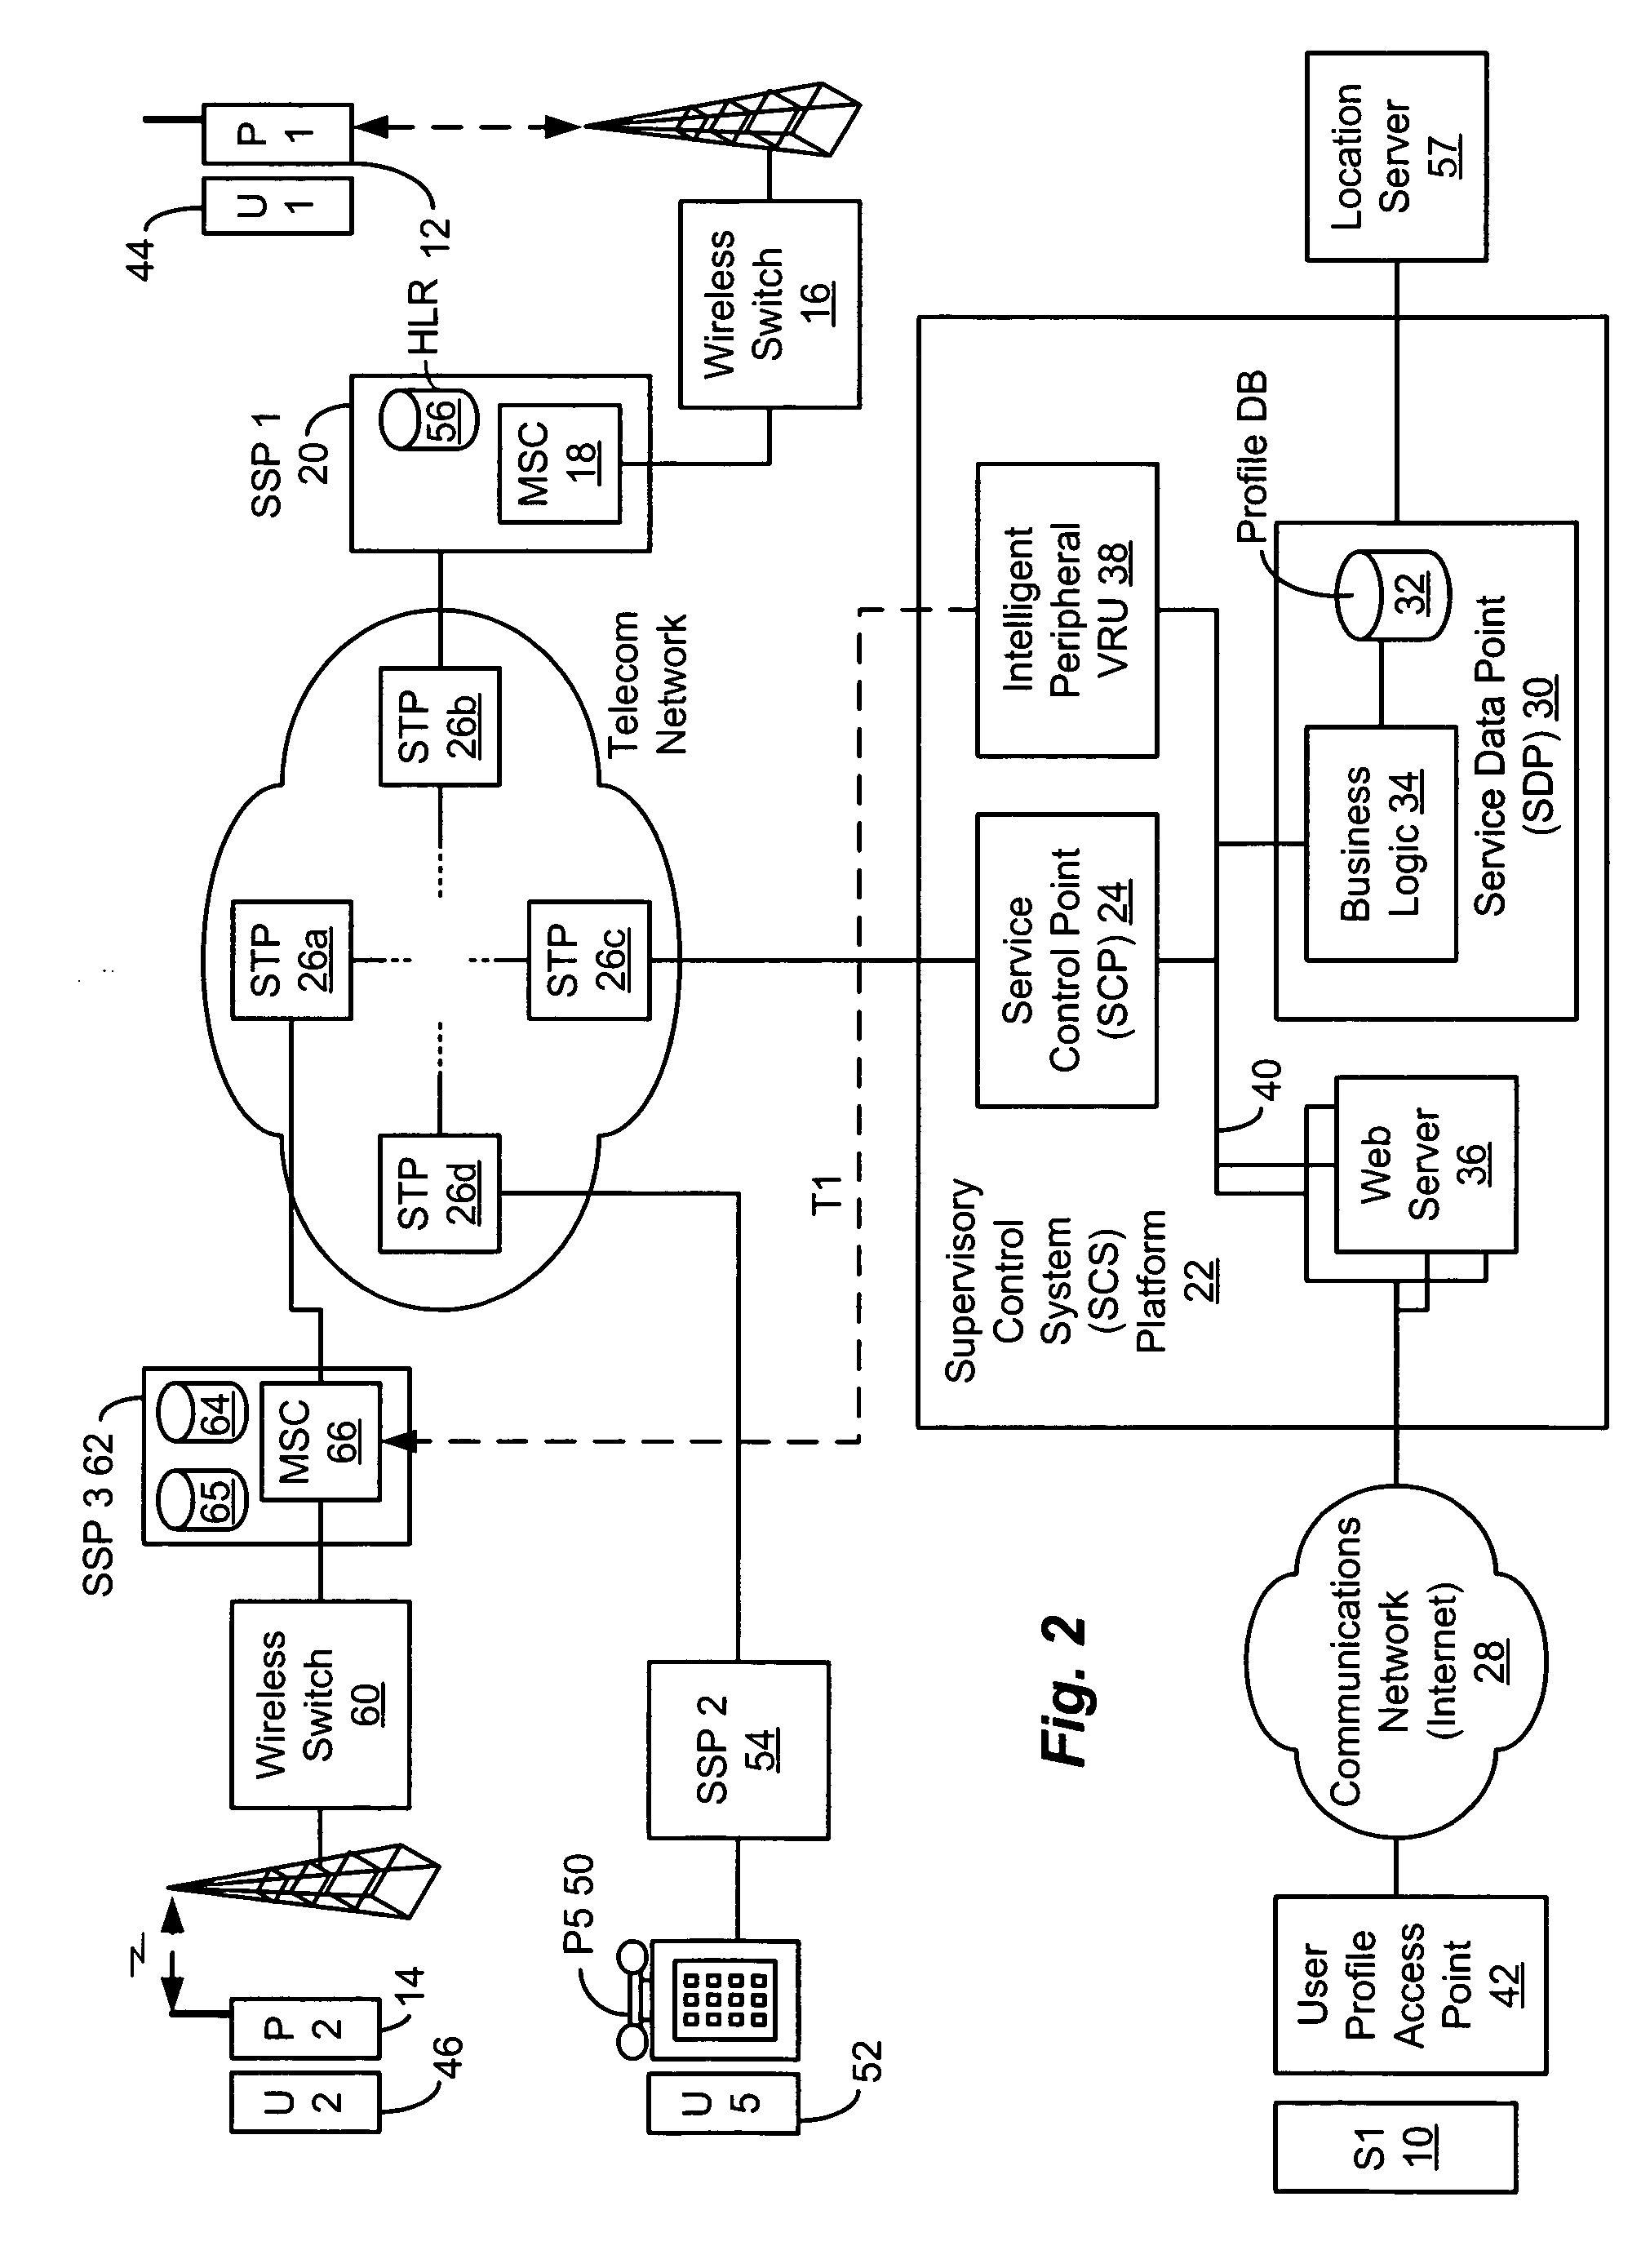 Method and system for providing supervisory control over wireless phone data usage